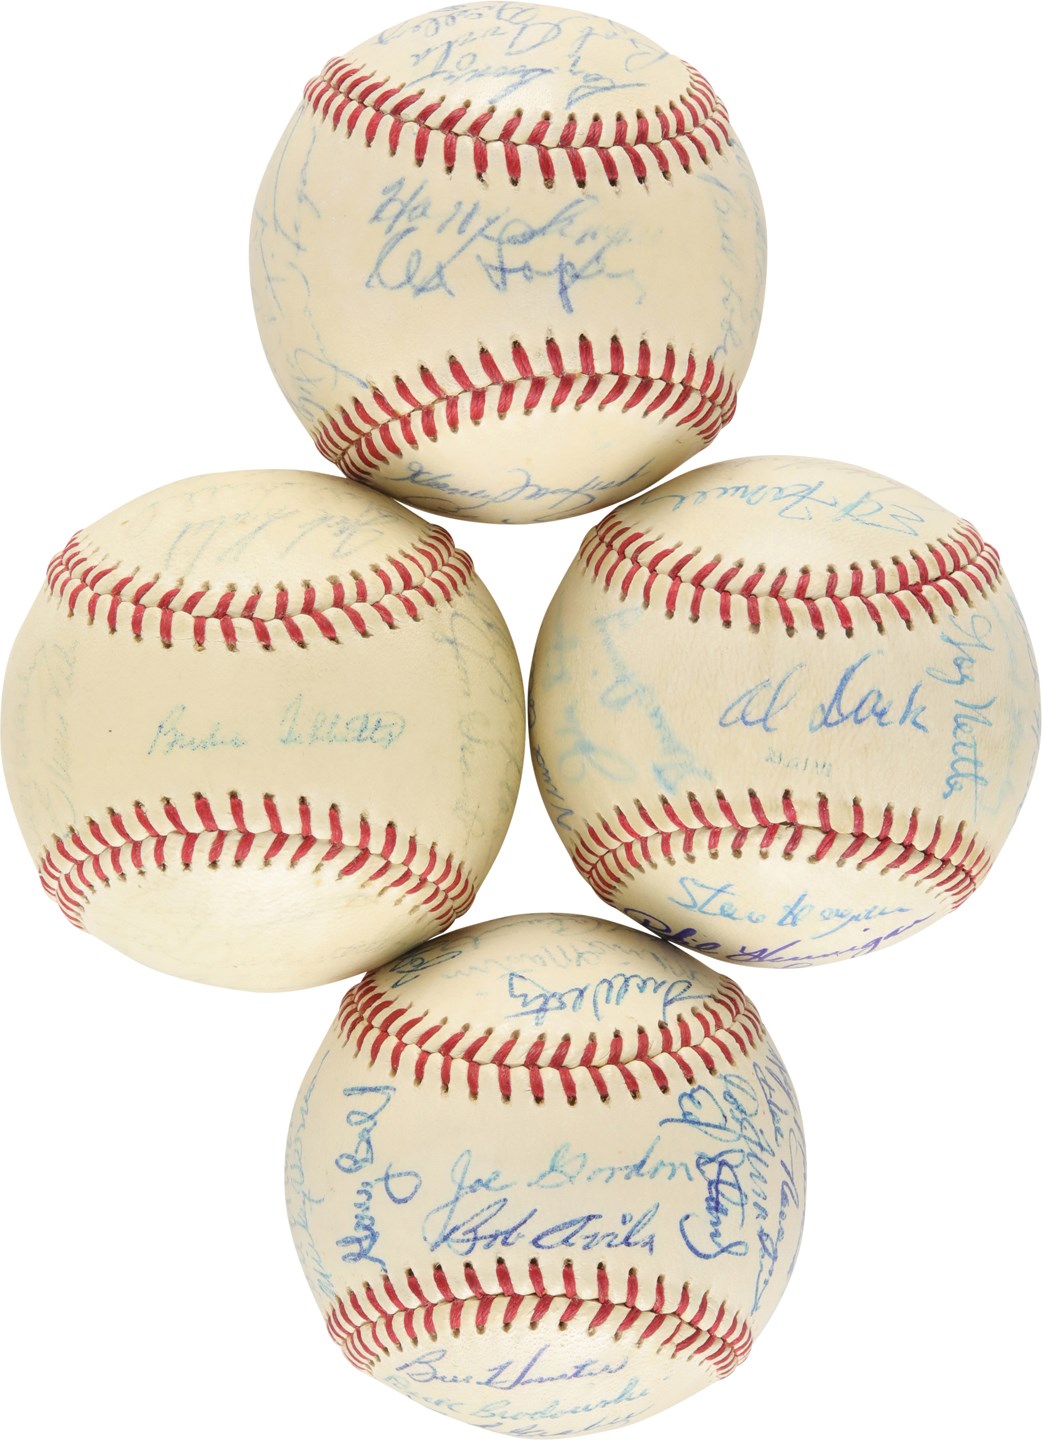 - 1952-1971 Cleveland Indians Team-Signed Baseball Collection (4)